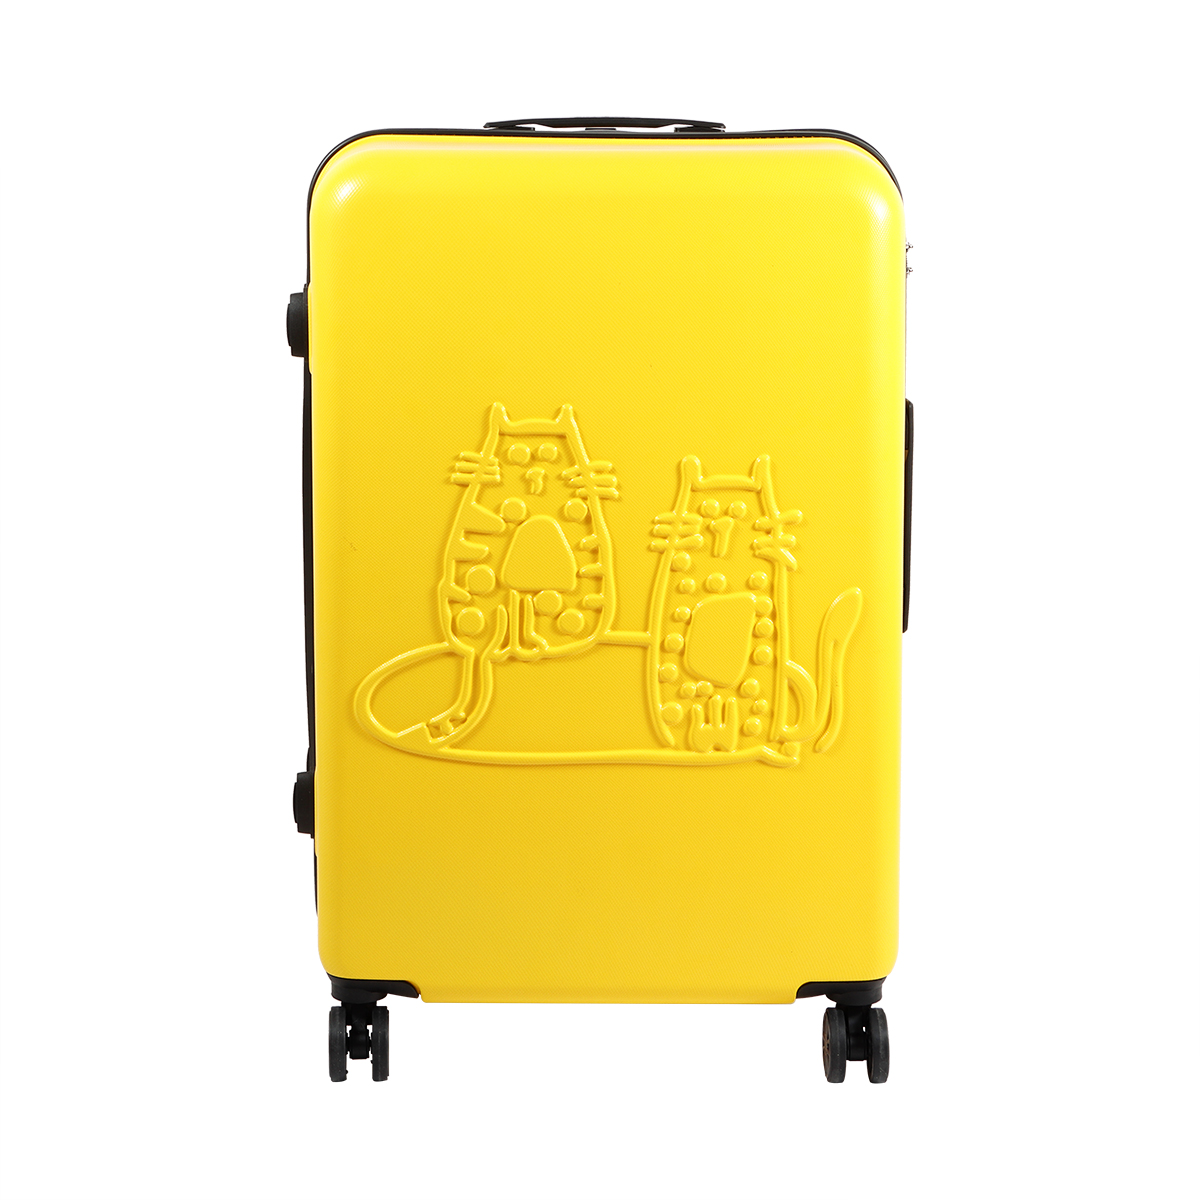 Biggdesign lightweight cats design carry on luggage with spinner wheel and lock system yellow 20-inch